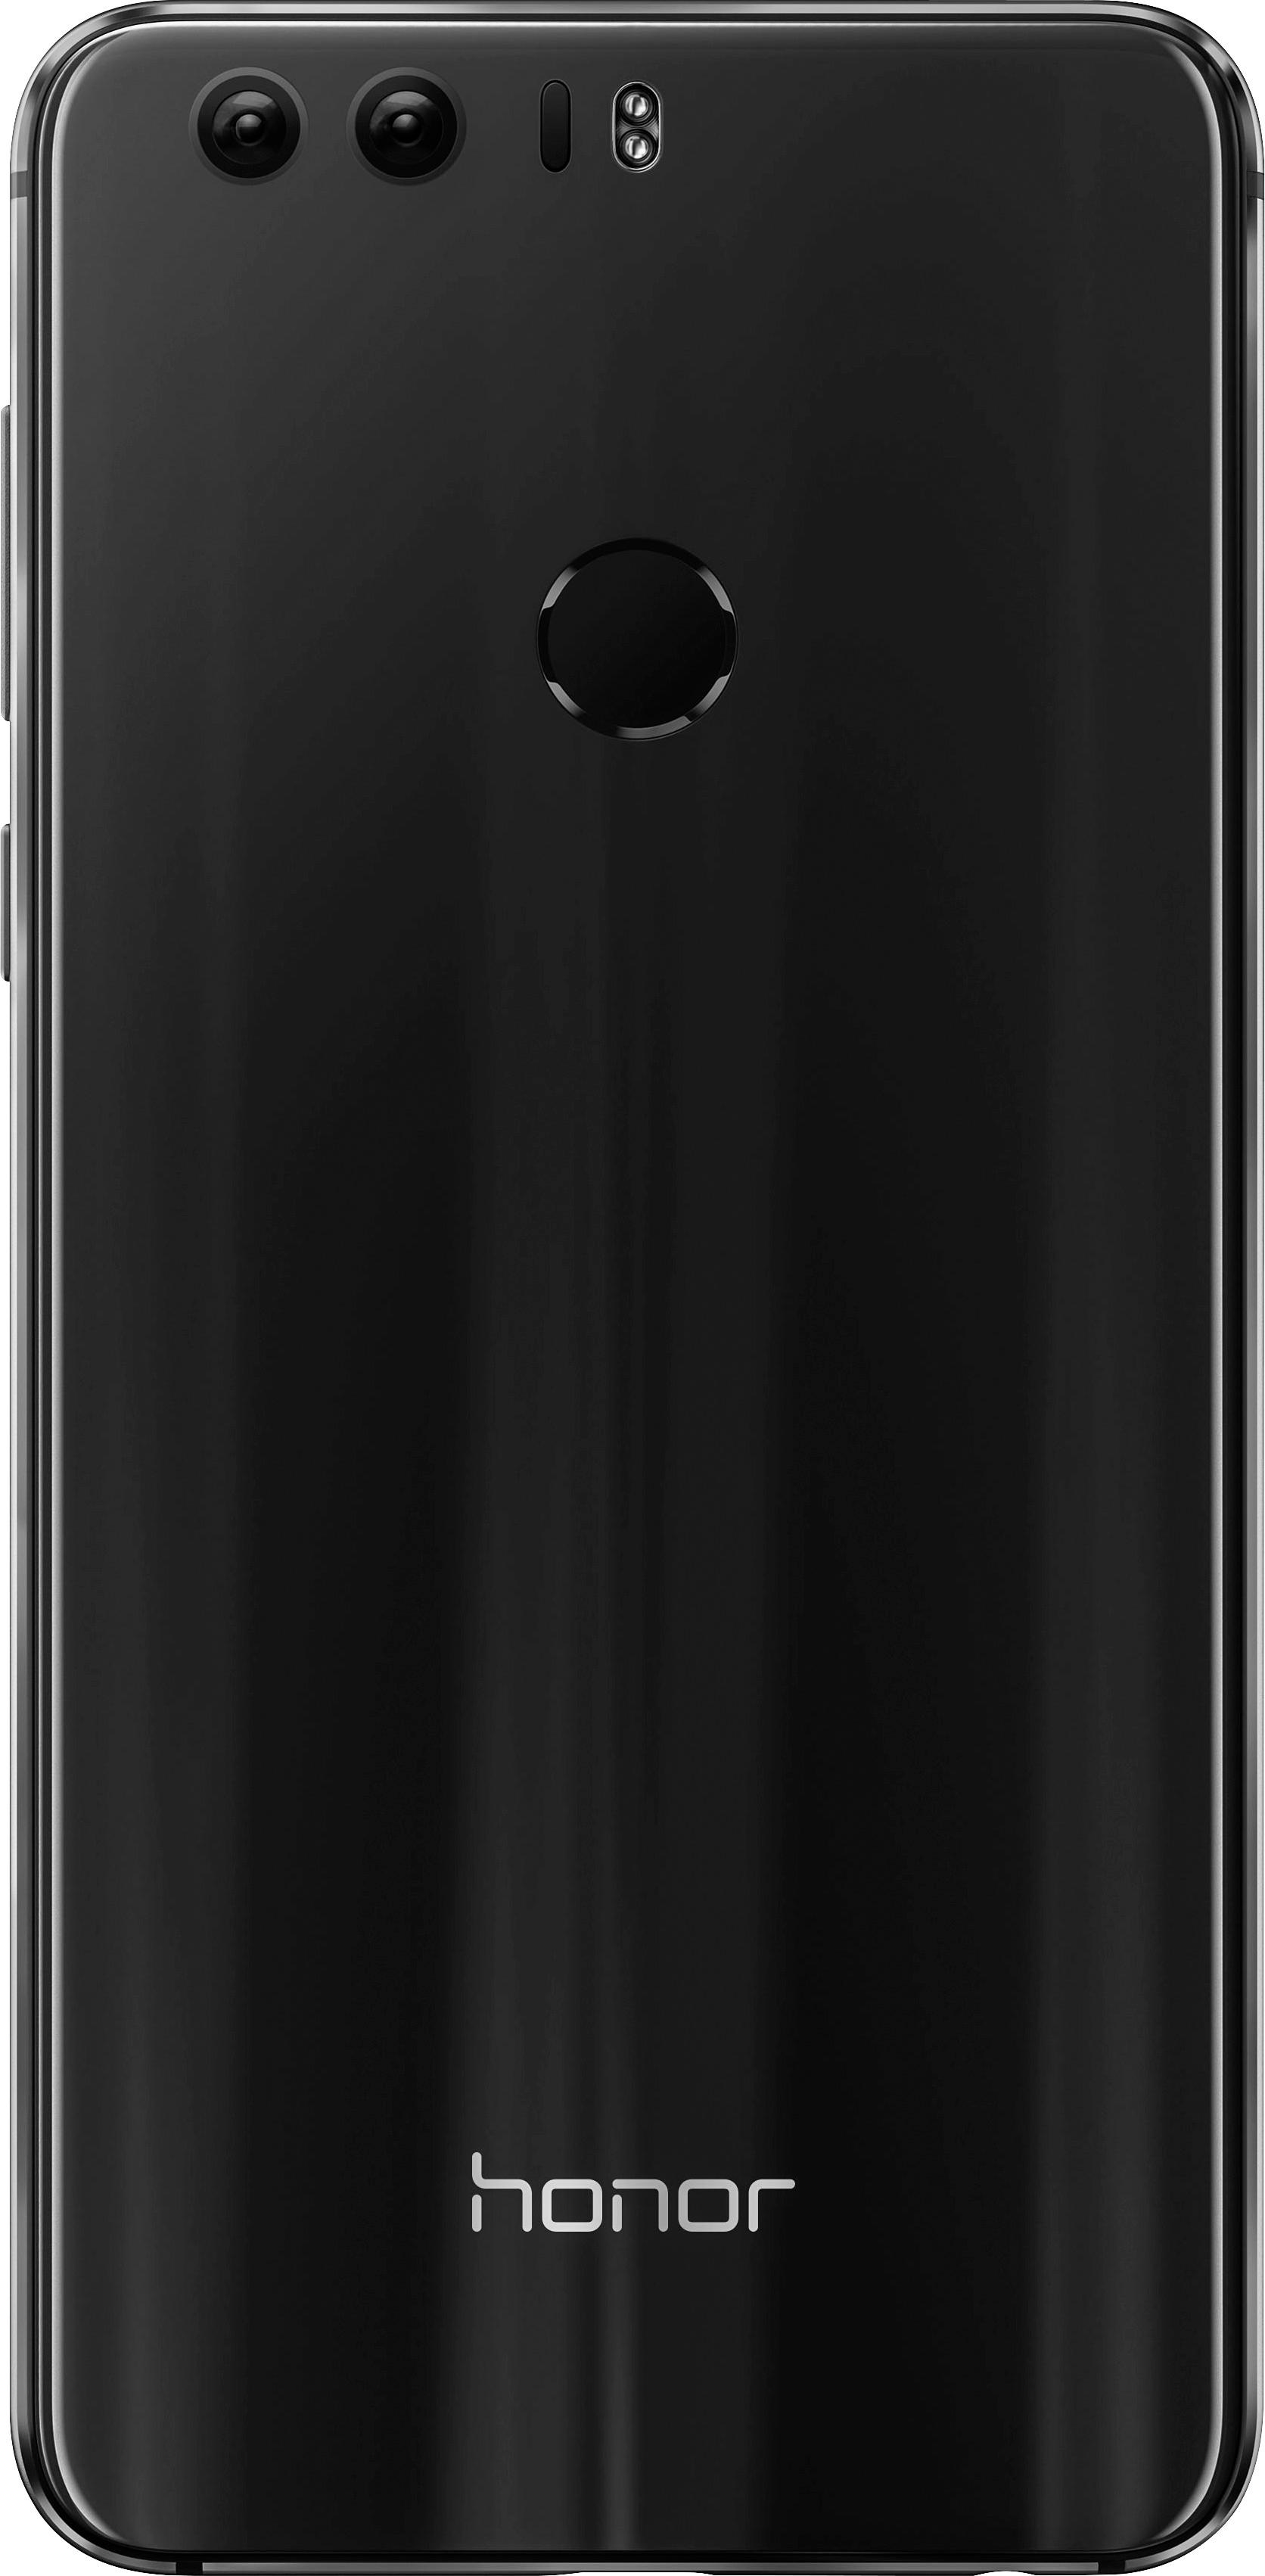 Onverschilligheid plug Hassy Best Buy: Huawei Honor 8 4G LTE with 32GB Memory Cell Phone (Unlocked)  Midnight black FRD-L04